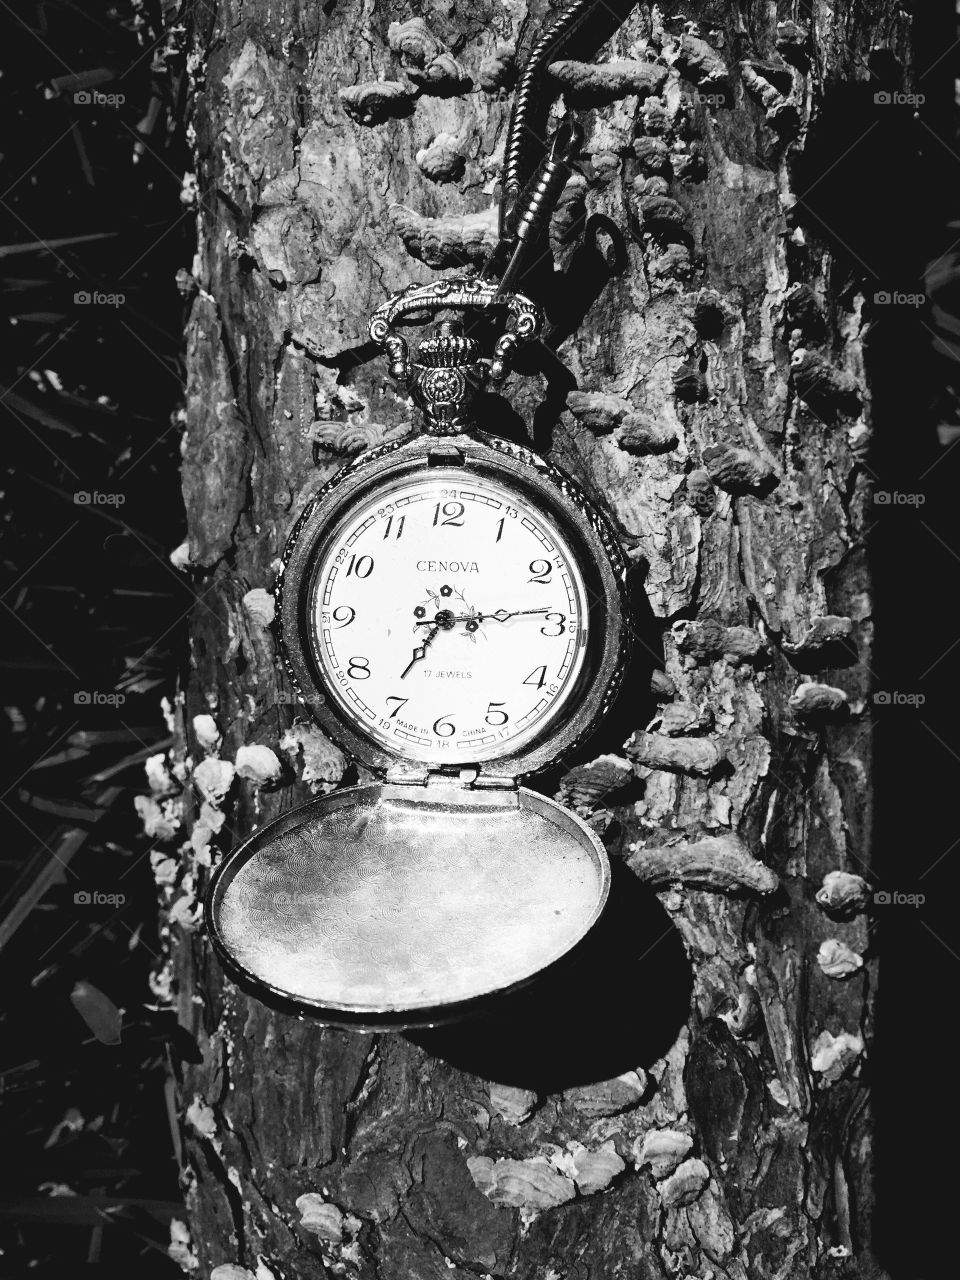 Only time will tell onOld pocket watch on a wood limb